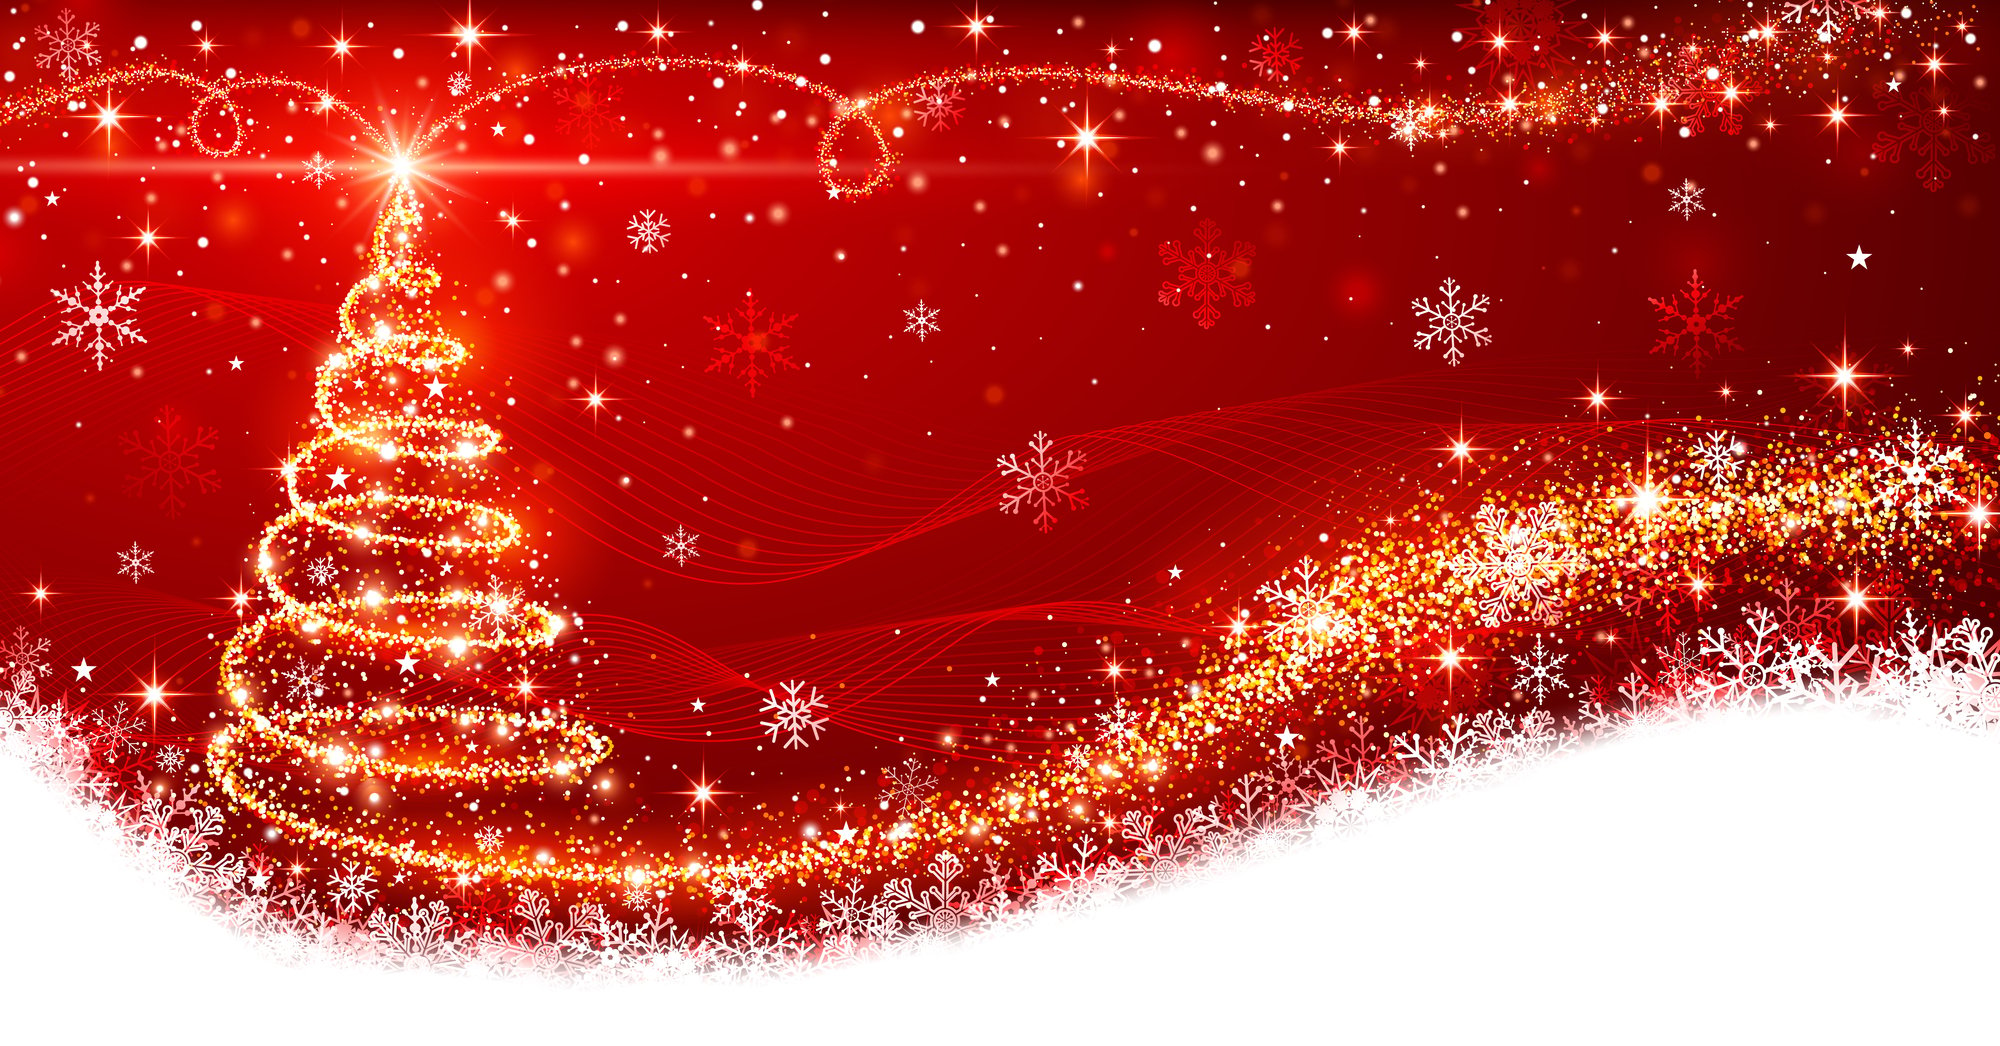 A Christmas tree decorated with snowflakes stands boldly against a vibrant red background.